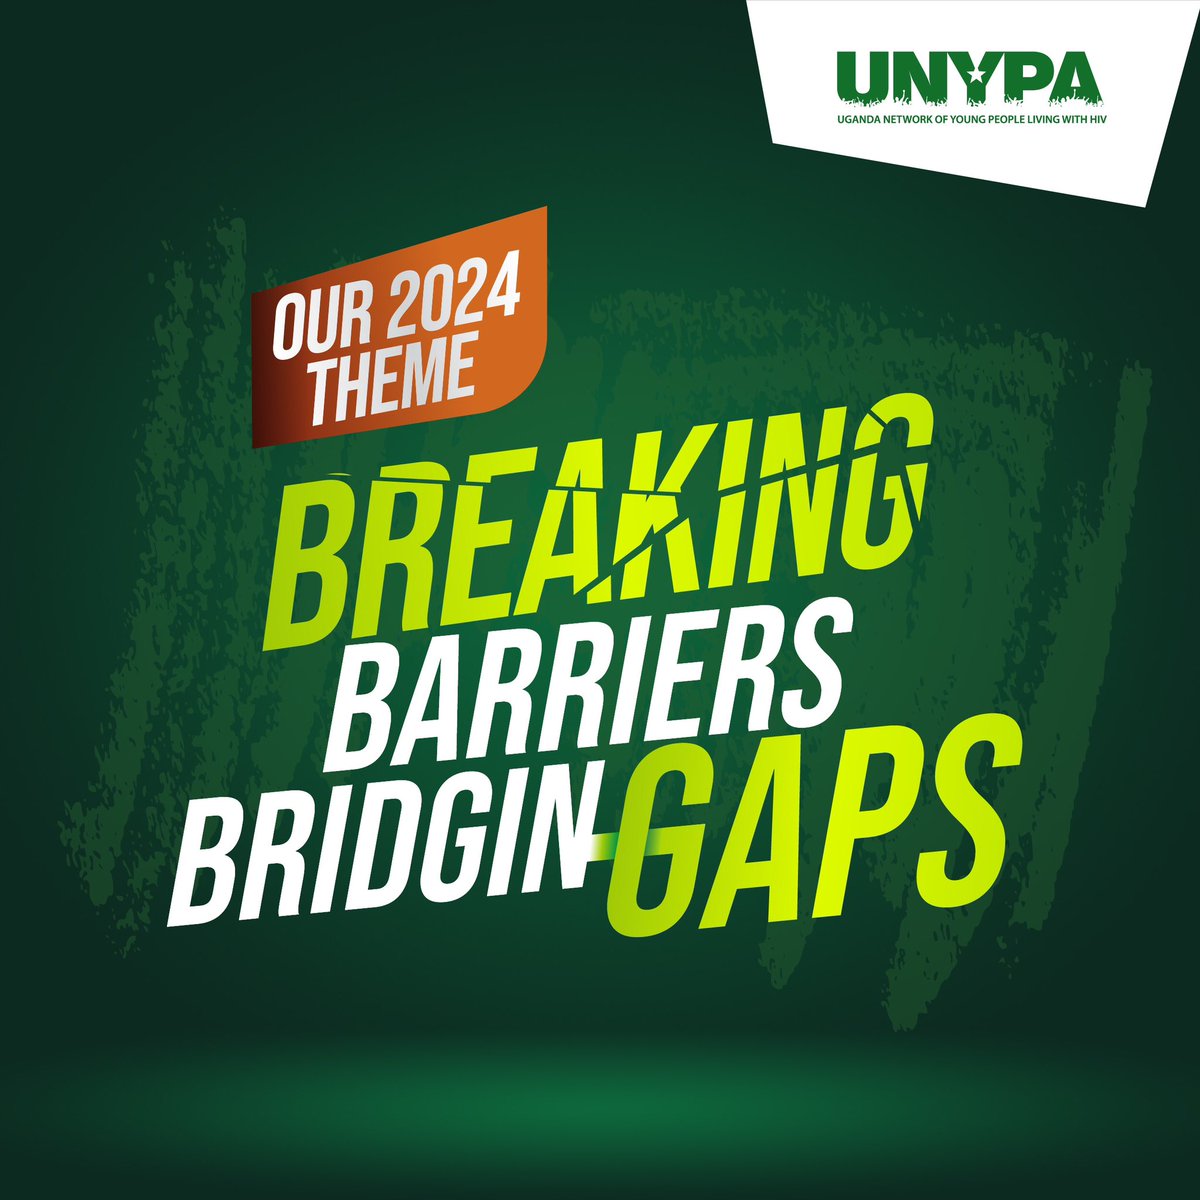 Our 2️⃣0️⃣2️⃣4️⃣ theme is “BREAKING BARRIERS BRIDGING GAPS.” The theme will help us address issues that hinder HIV service delivery in different communities. @UNYPA1 #BBBG